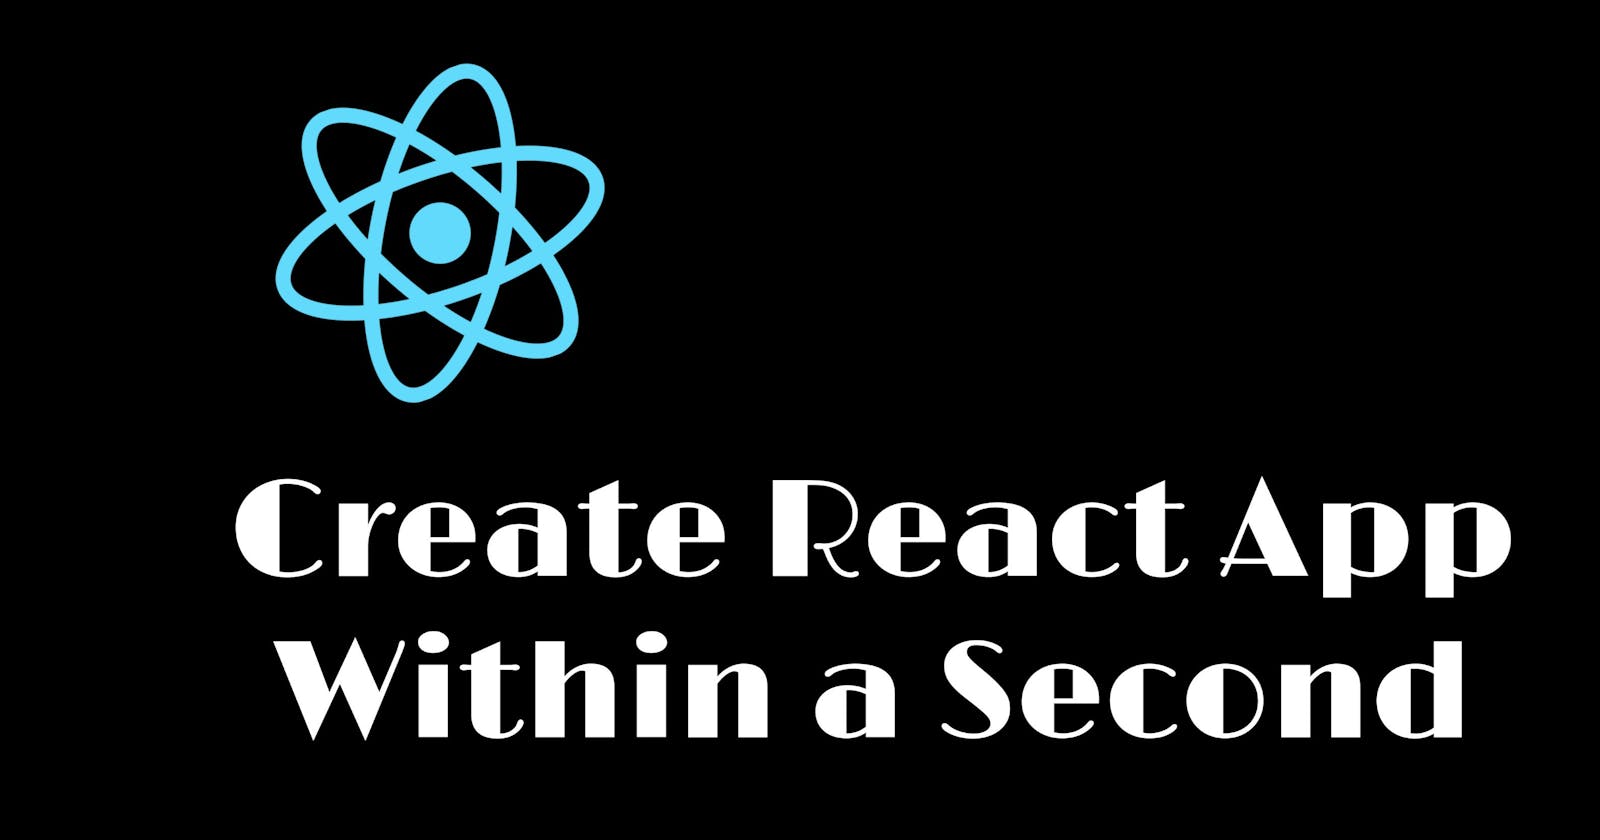 Create React App within a Second